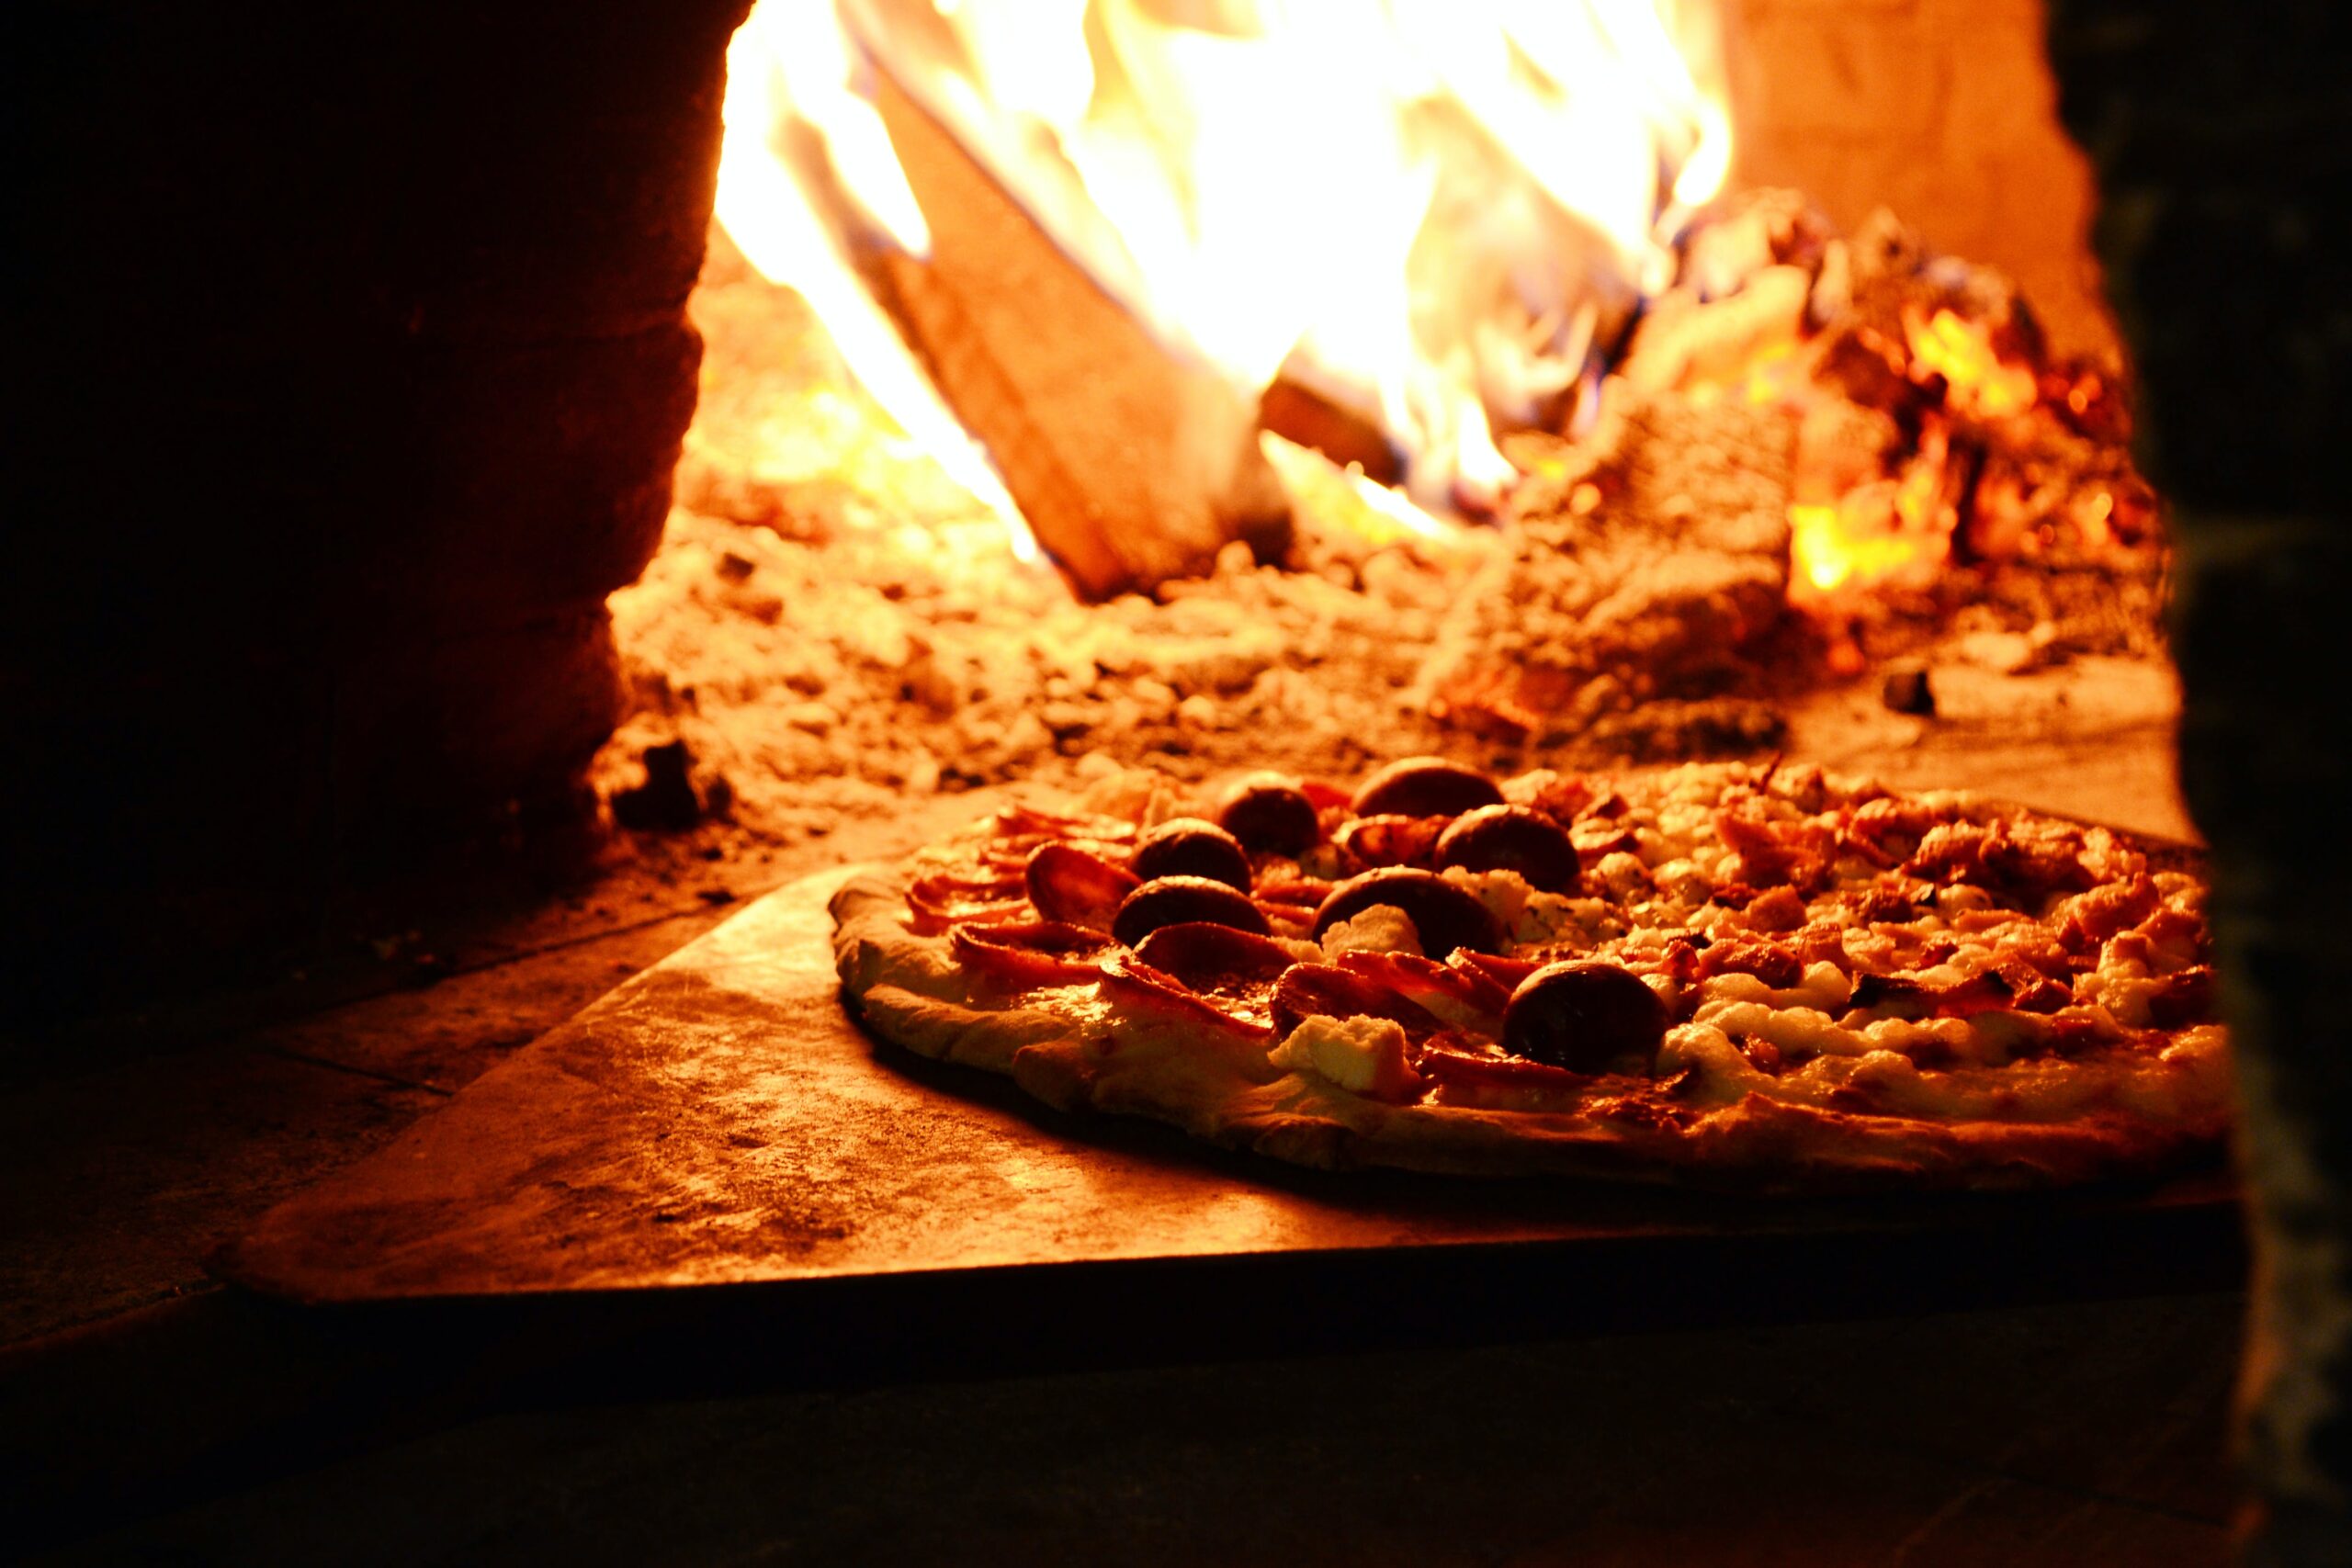 A pizza slides off a peel into a wood-fired oven. One half seems to have salami and olives, the other half perhaps just cheese and tomato.